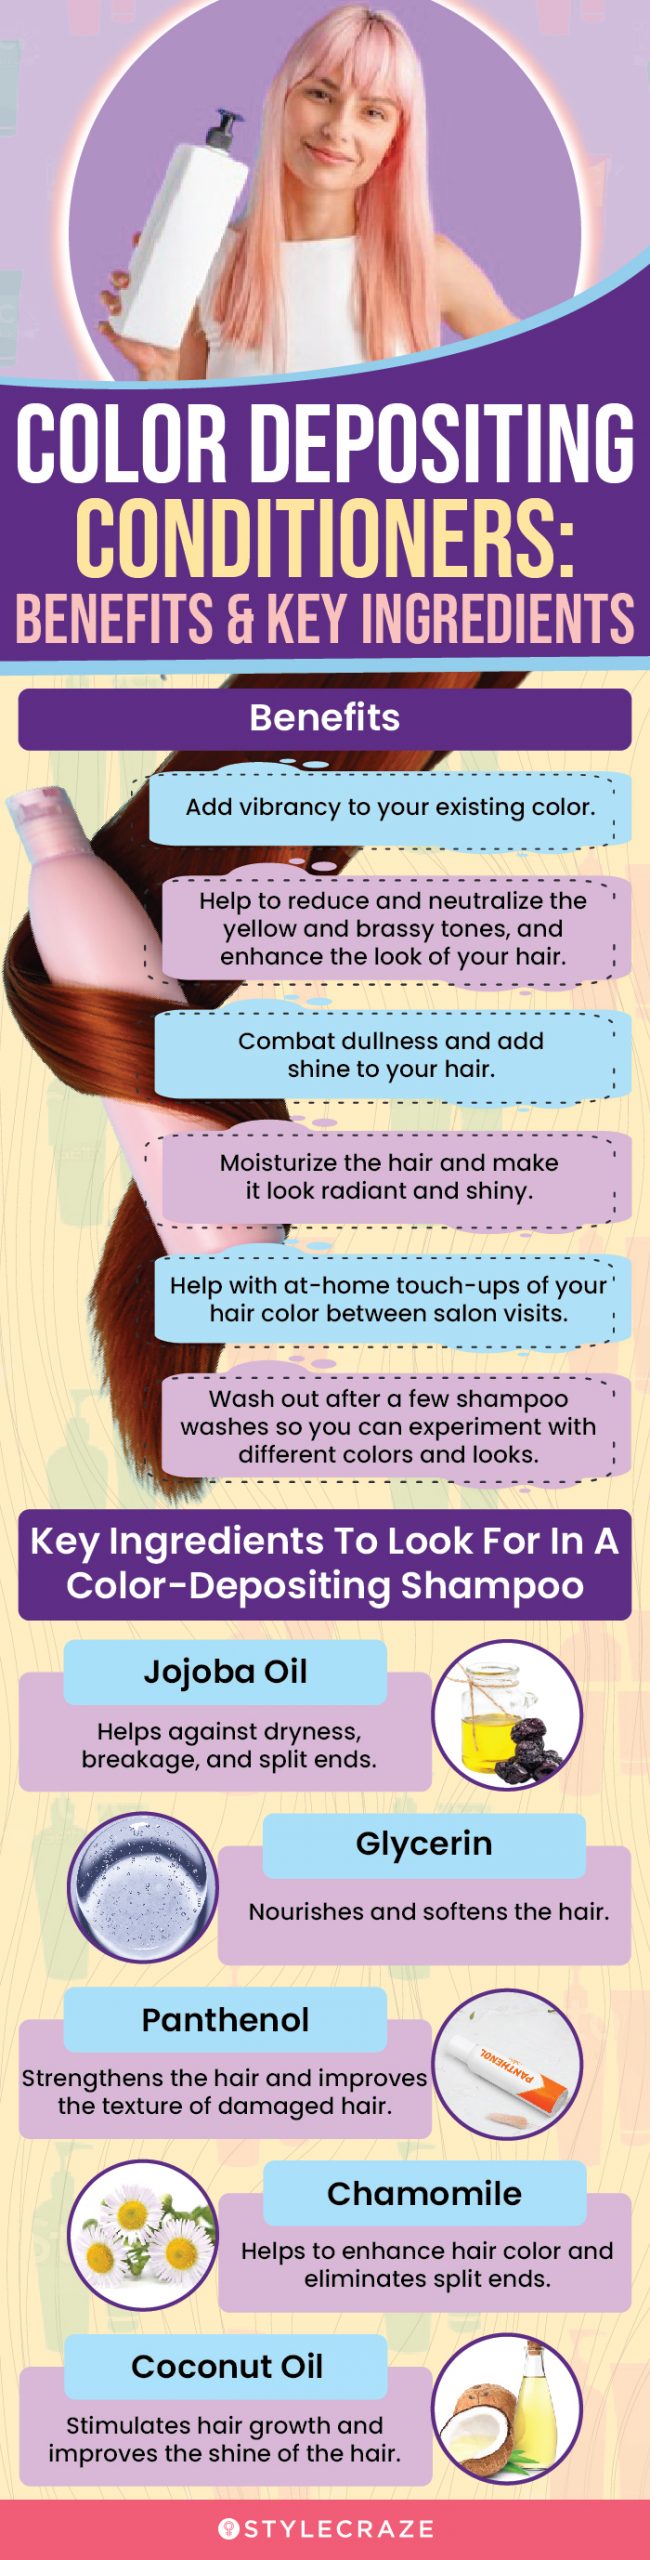 Color Depositing Conditioners: Benefits & Key Ingredients (infographic)